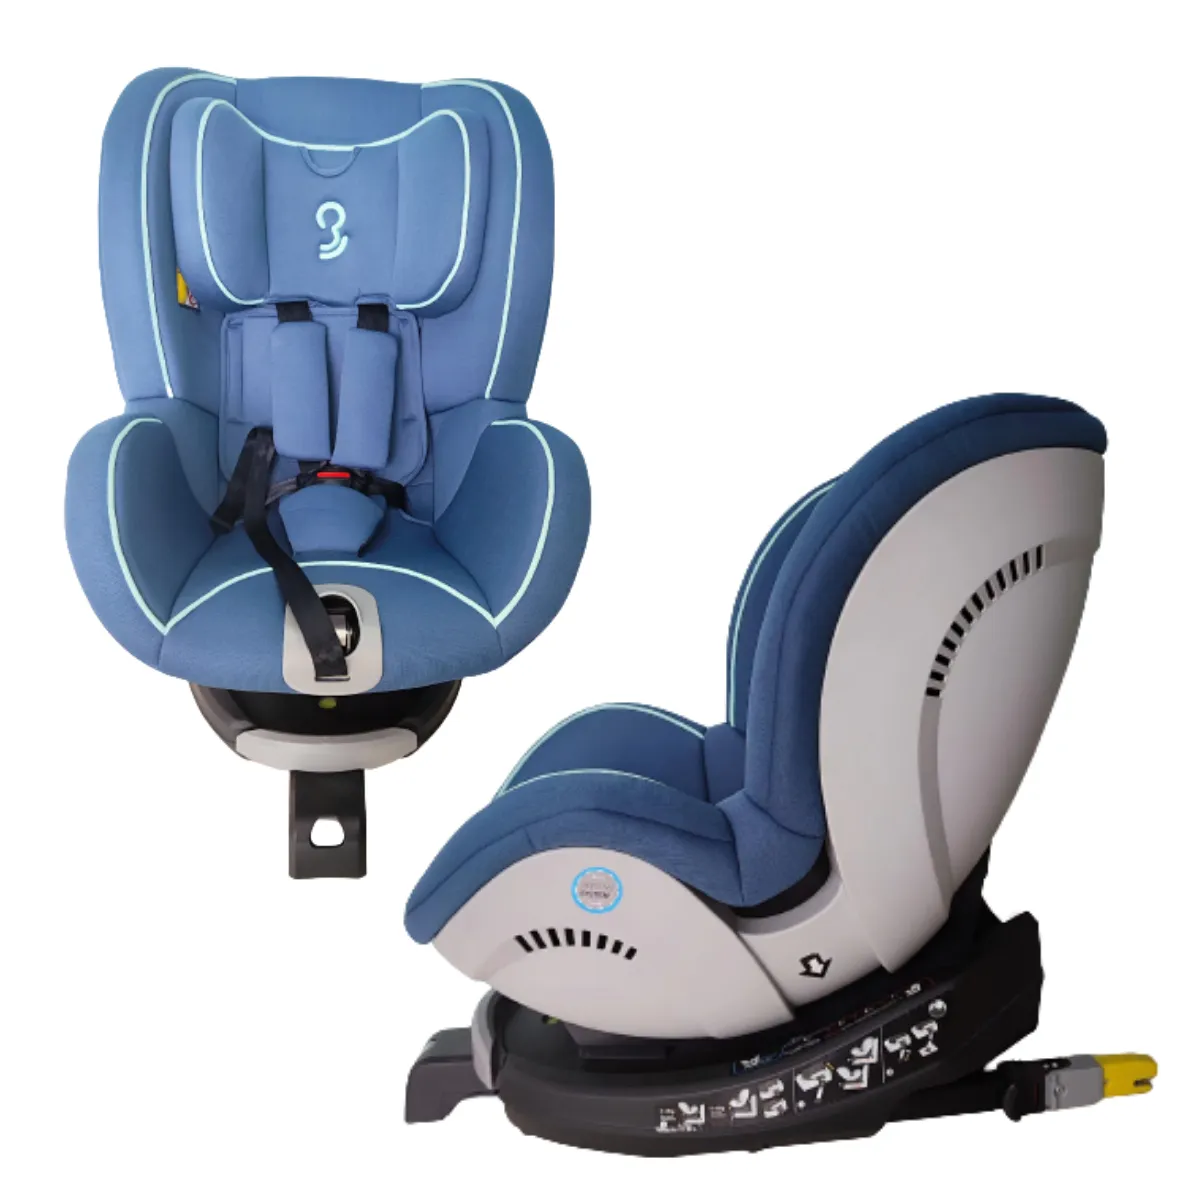 4 recline positions Children baby car seats can be fitted Infant car seat with ISOFIX base